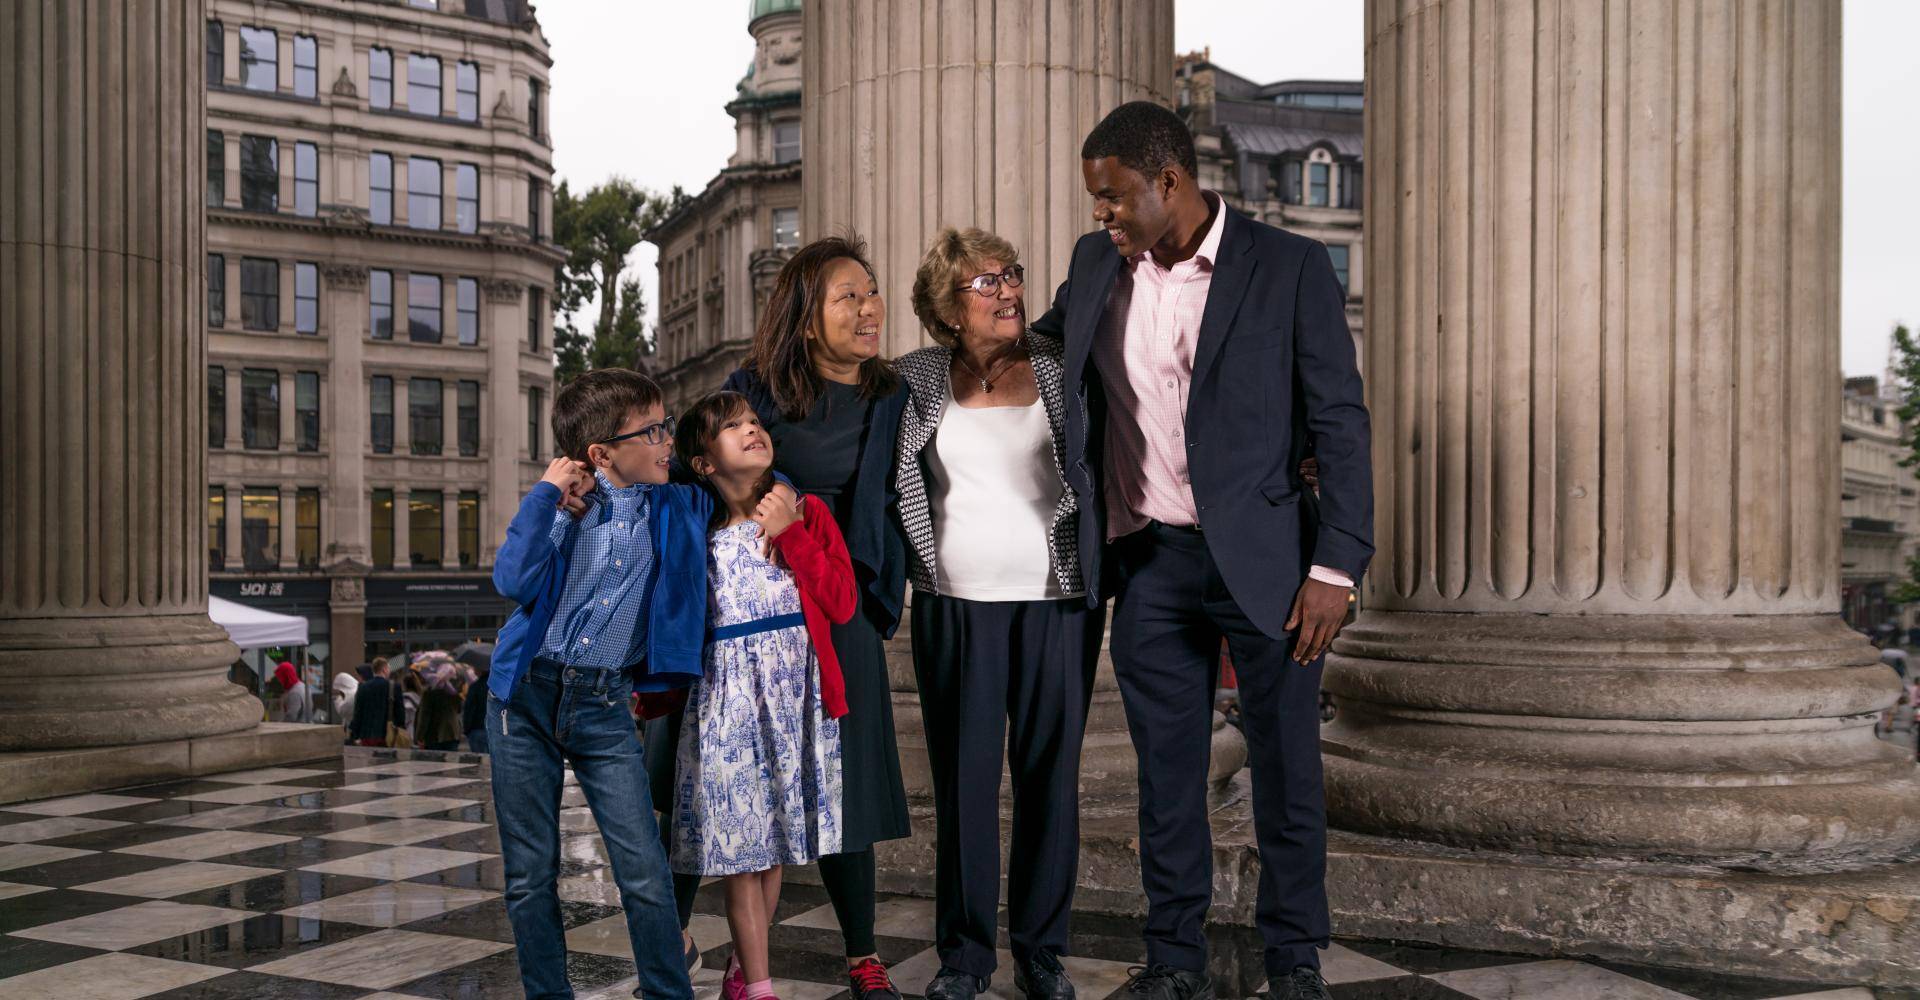 Yodia and her family outside St Paul's